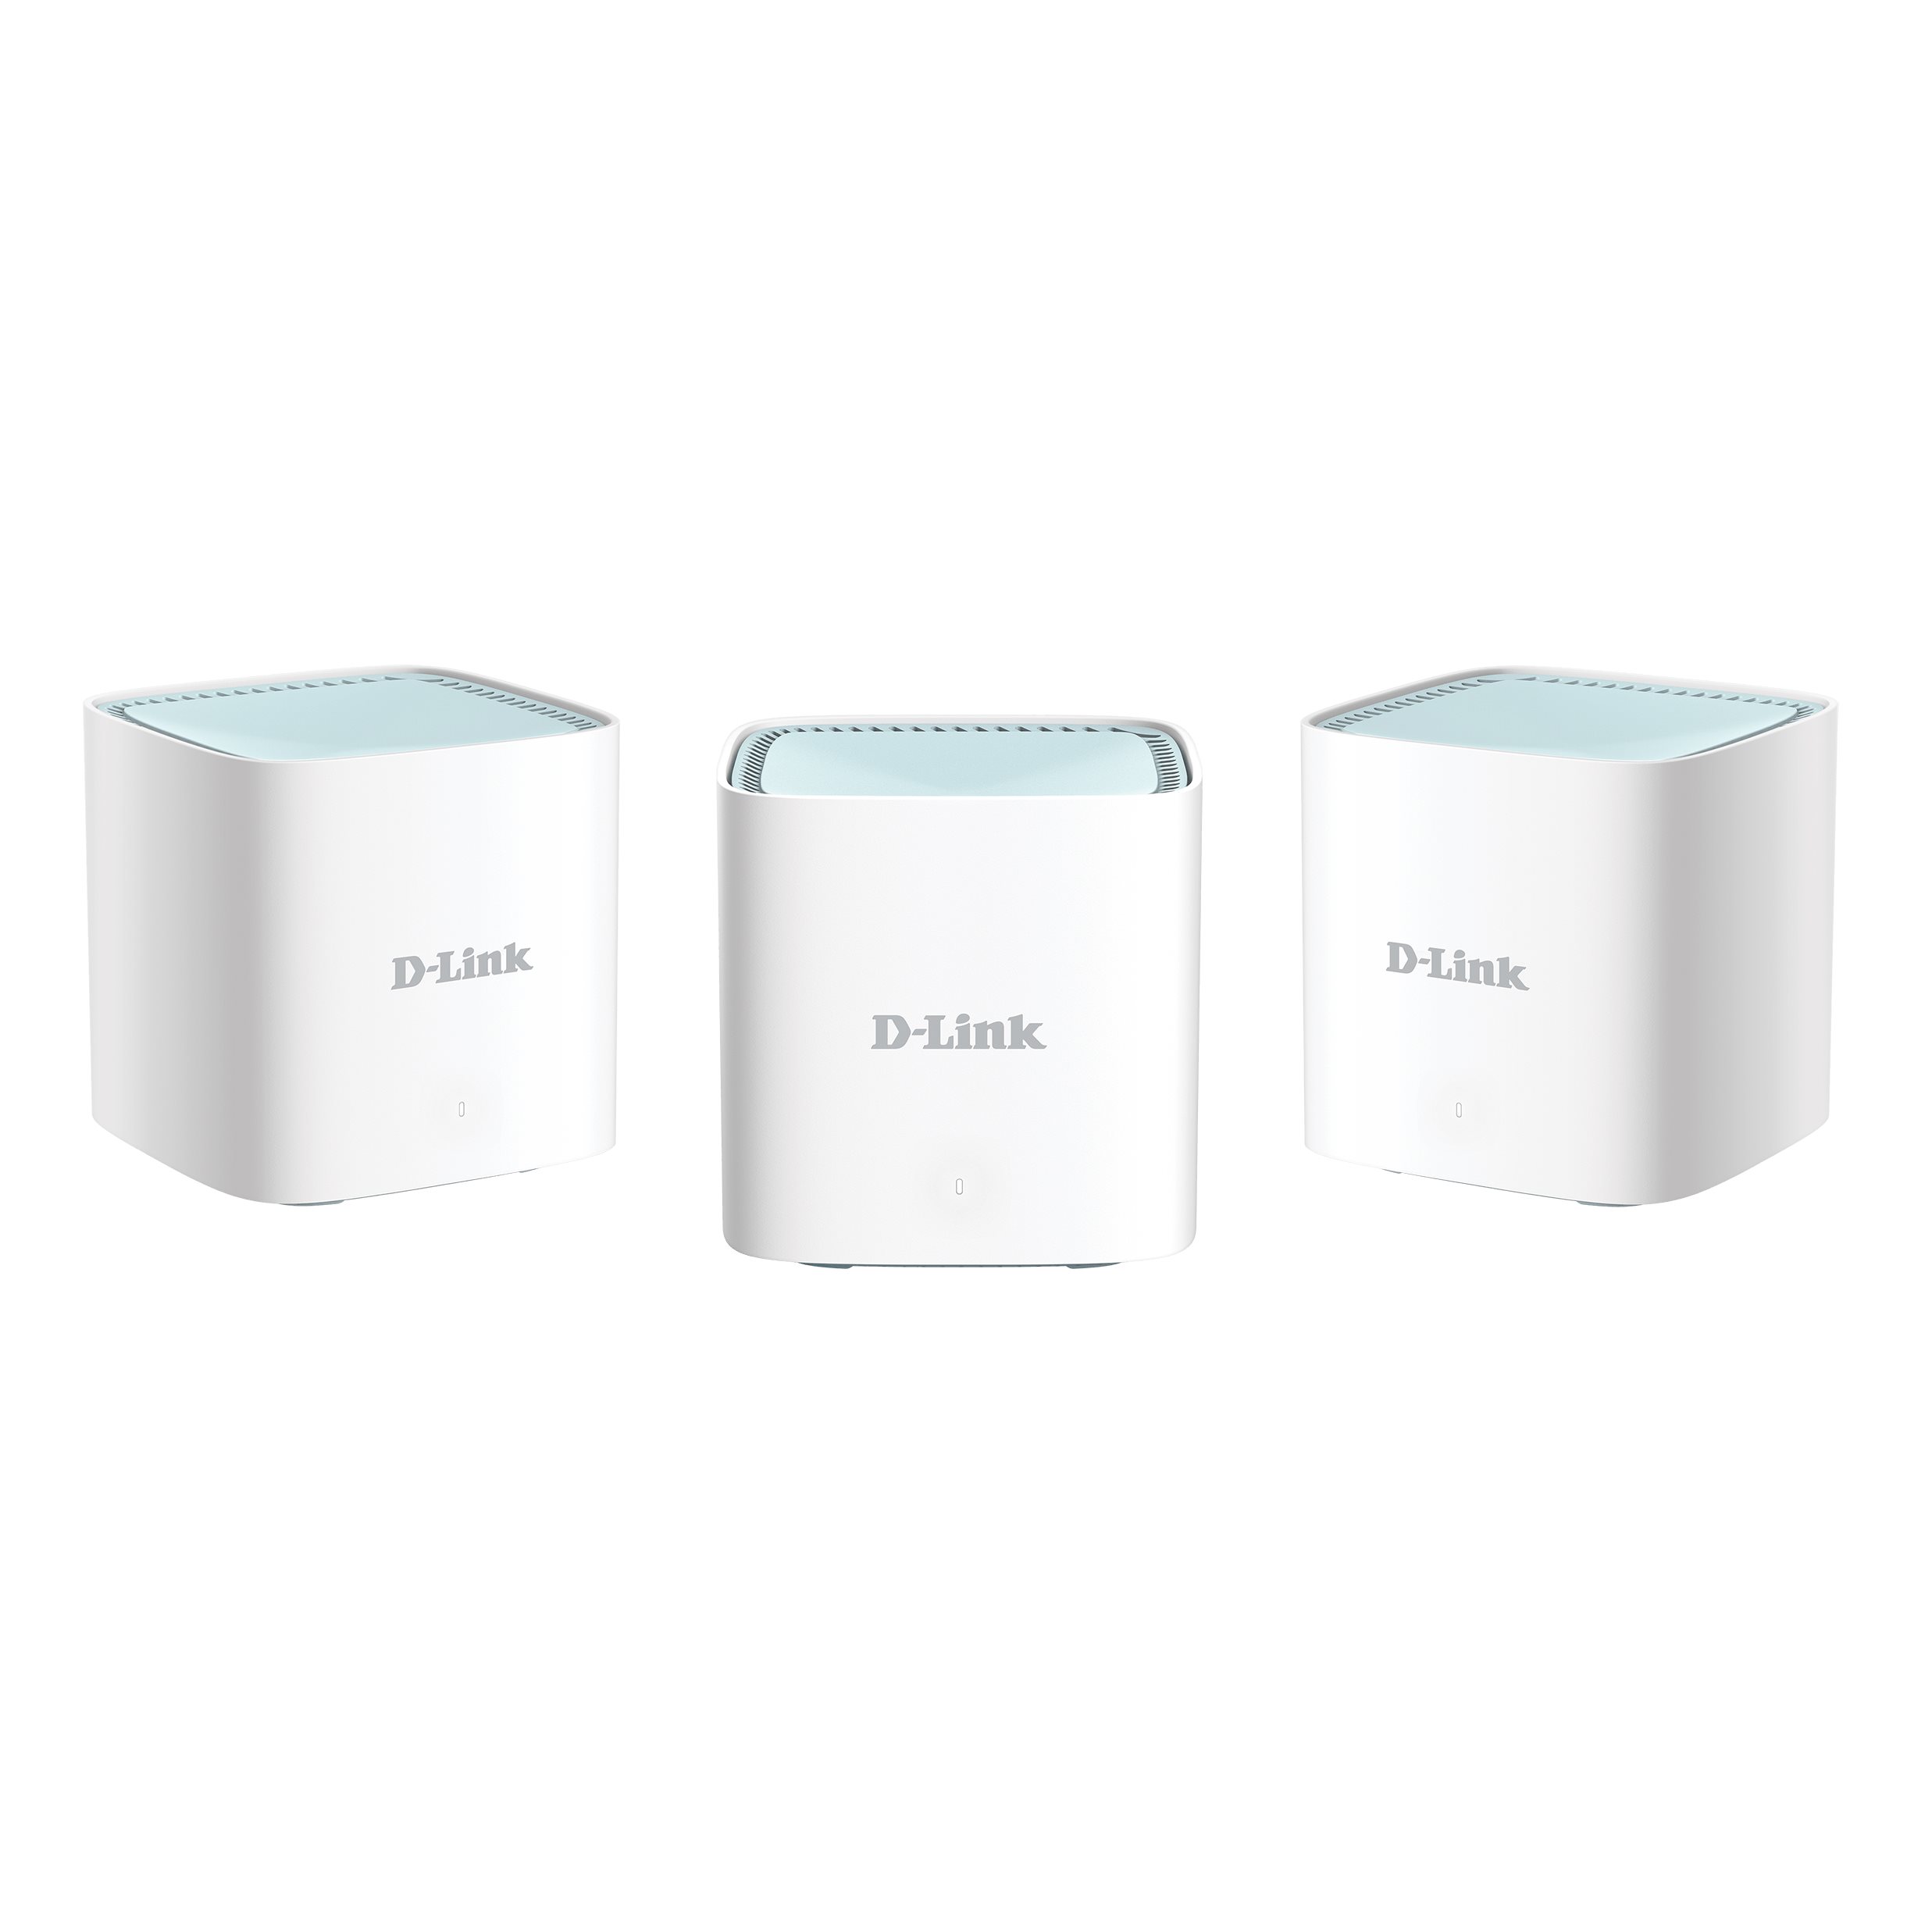   Systme WiFi Mesh   Solution MESH WiFi 6 Eagle Pro AX1500 (Pack de 3) M15-3